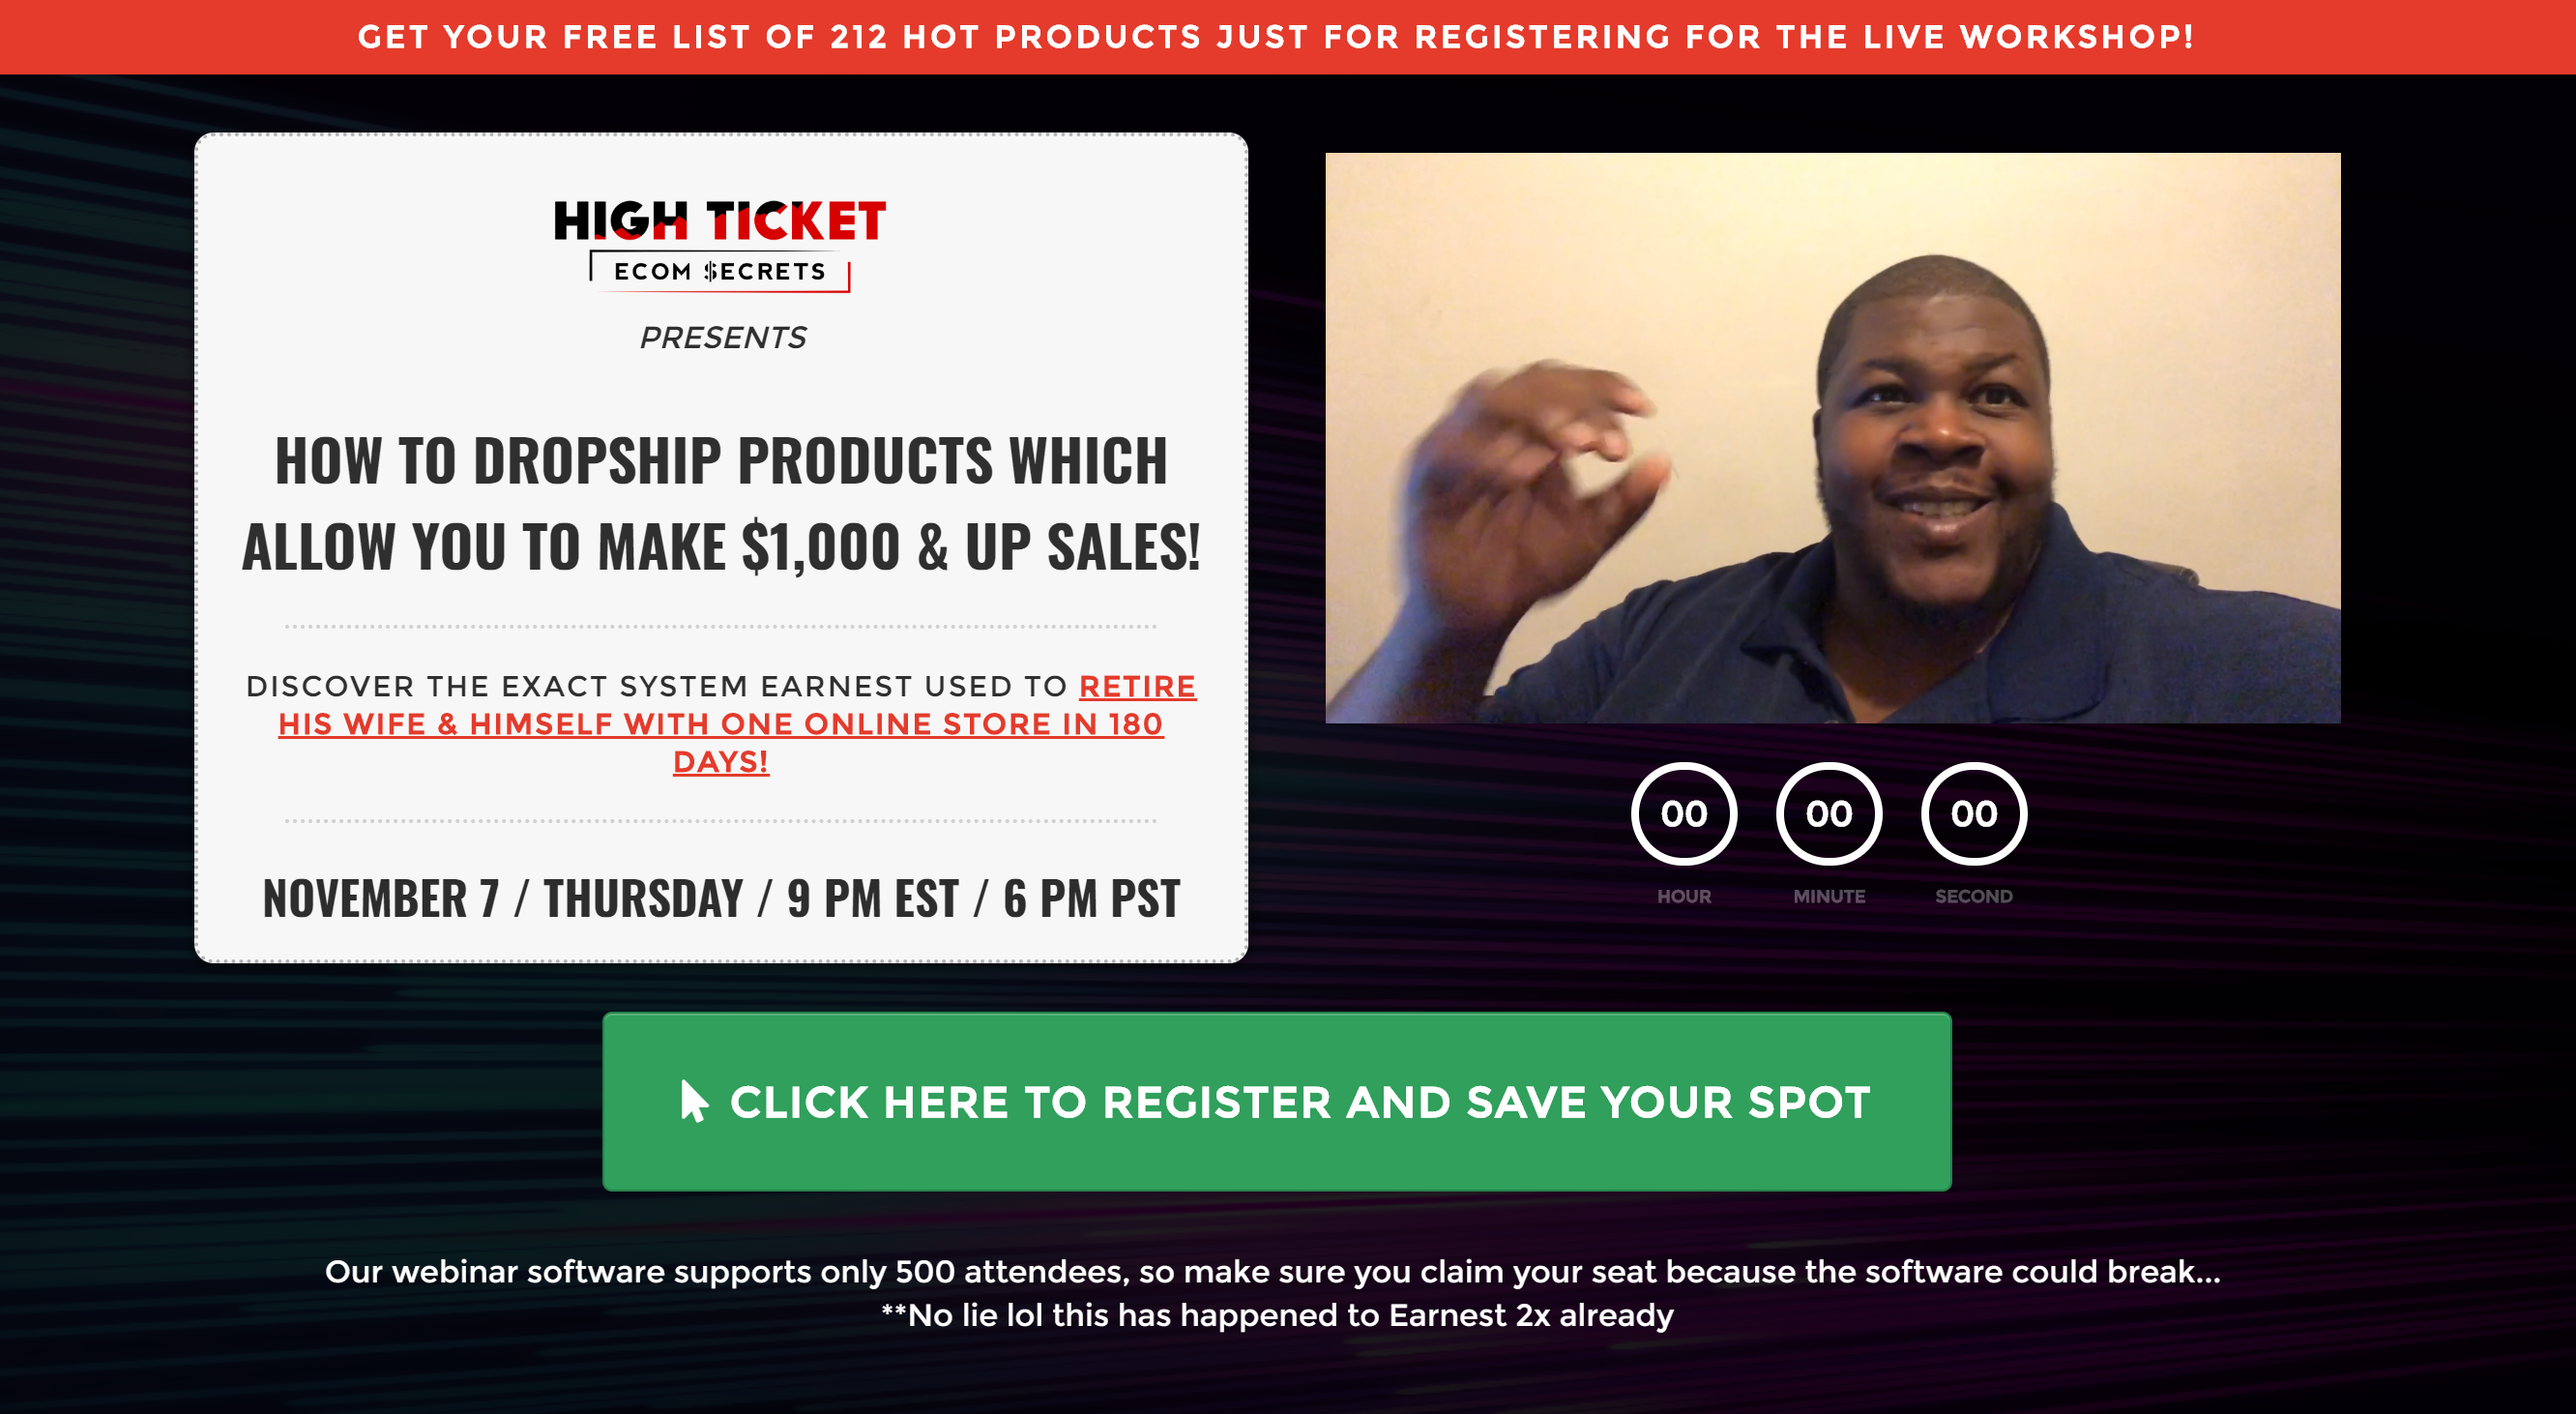 Earnest Epps High ticket dropshipping how to do high ticket dropshipping